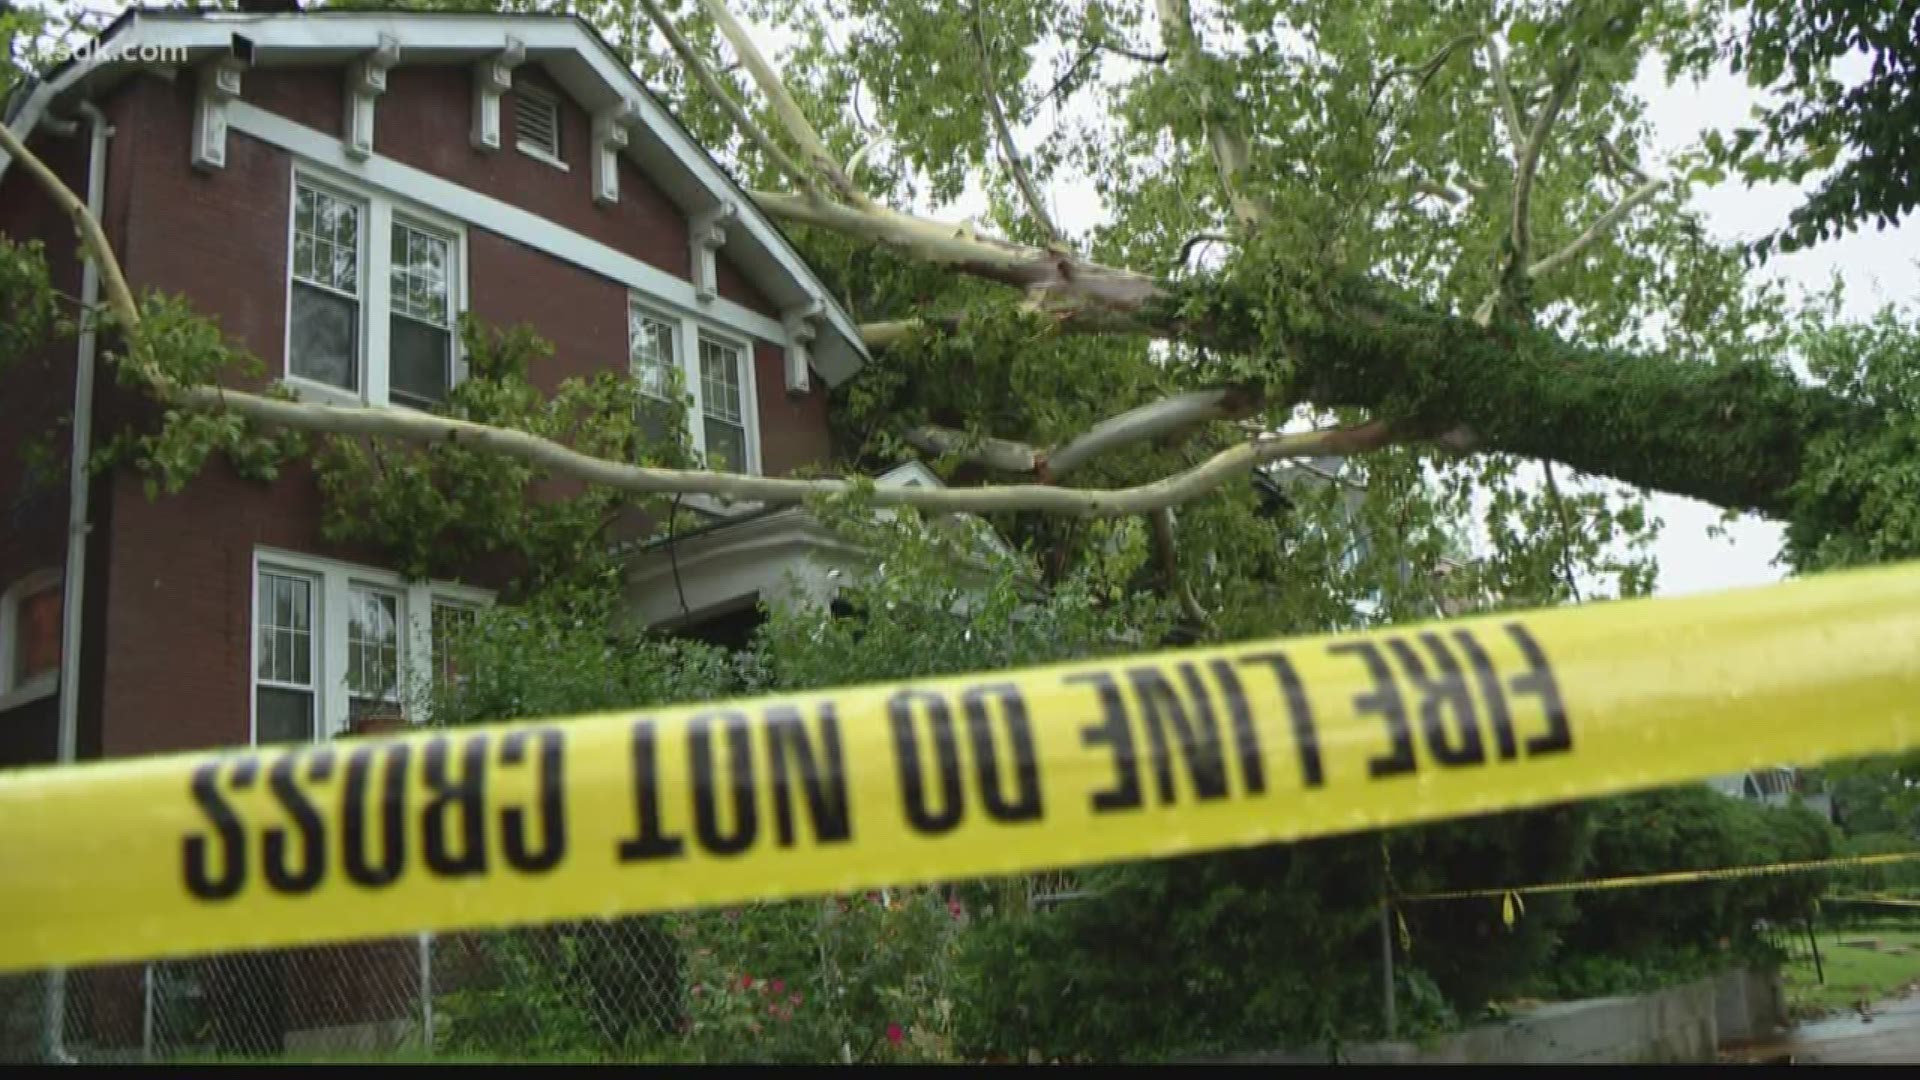 A 100-foot-tall tree landed with the bulk of its weight on Roosevelt Hawkins' home Wednesday, but neighbor Barbara Harris worries she could be next.